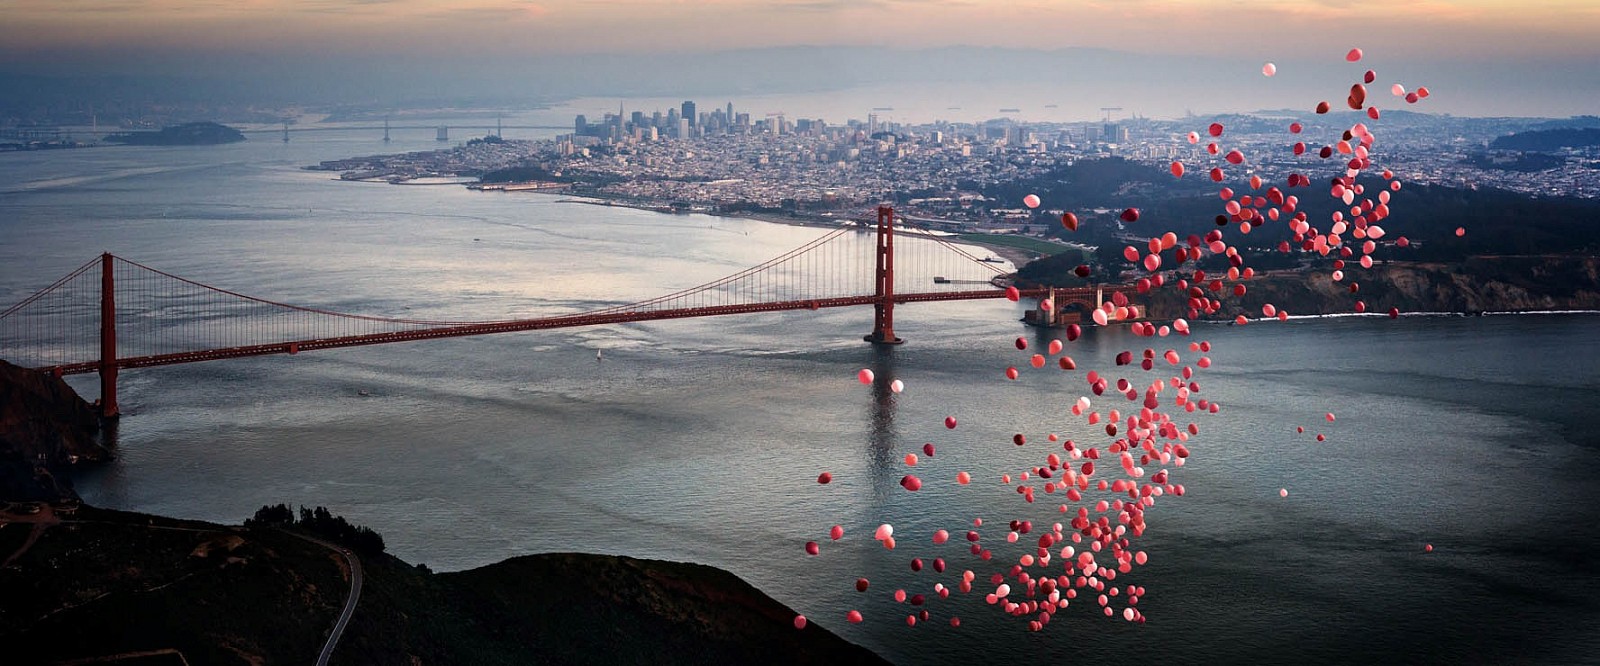 David Drebin, Balloons over San Francisco , 2016
Digital C Print, 30 x 72 inches Also available in 20 x 48 inches and 40 x 96 inches